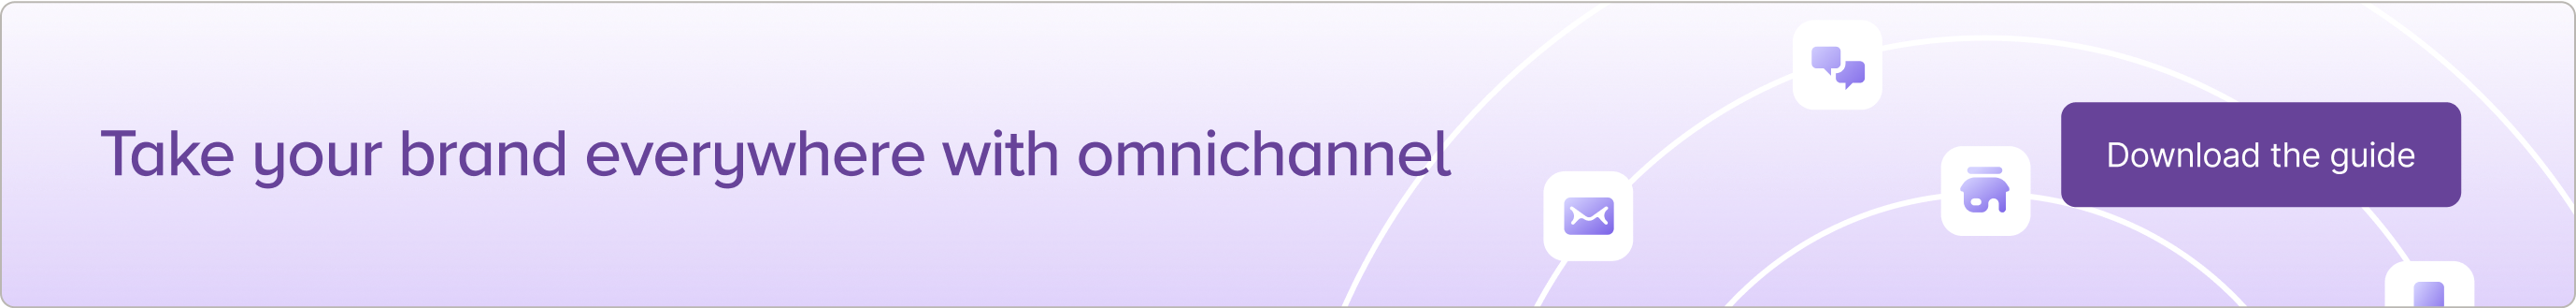 Download our omnichannel guide